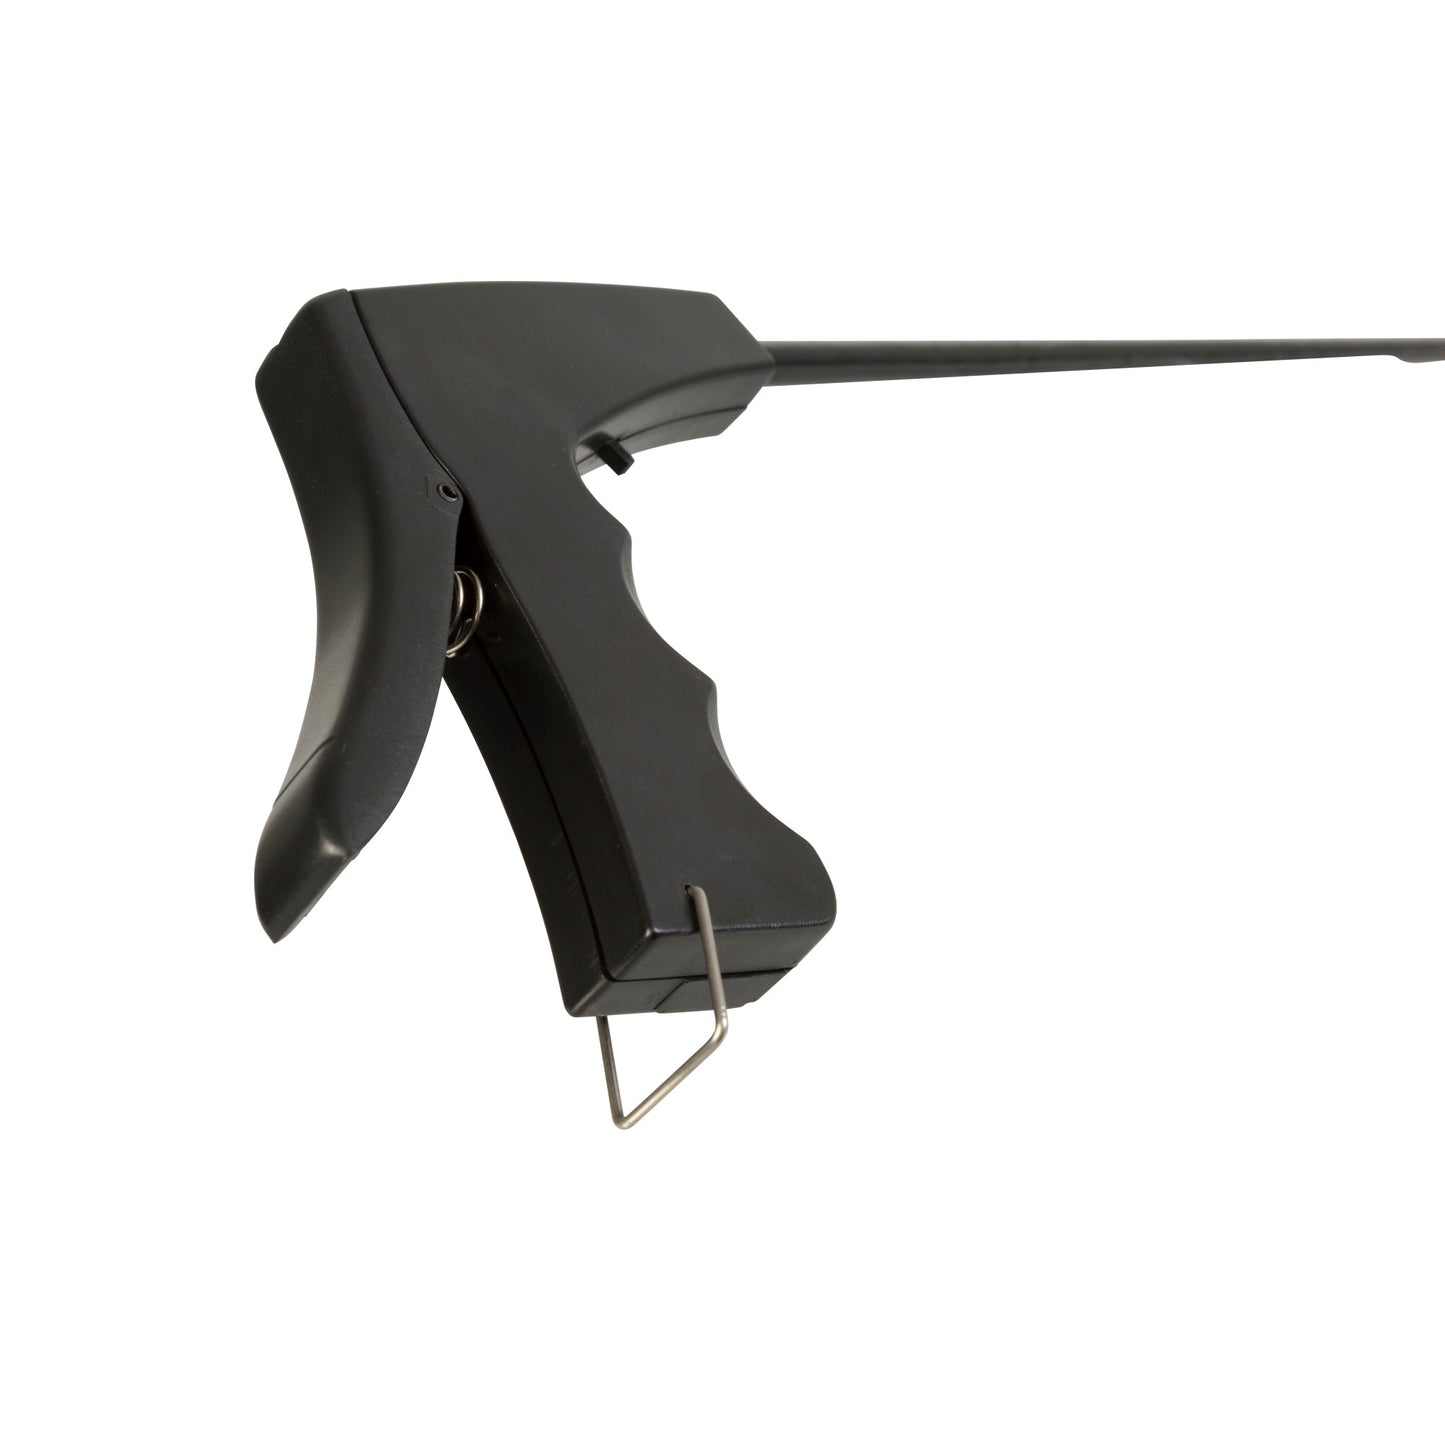 42-Inch Grabber / Pickup Tool with Built-In Light